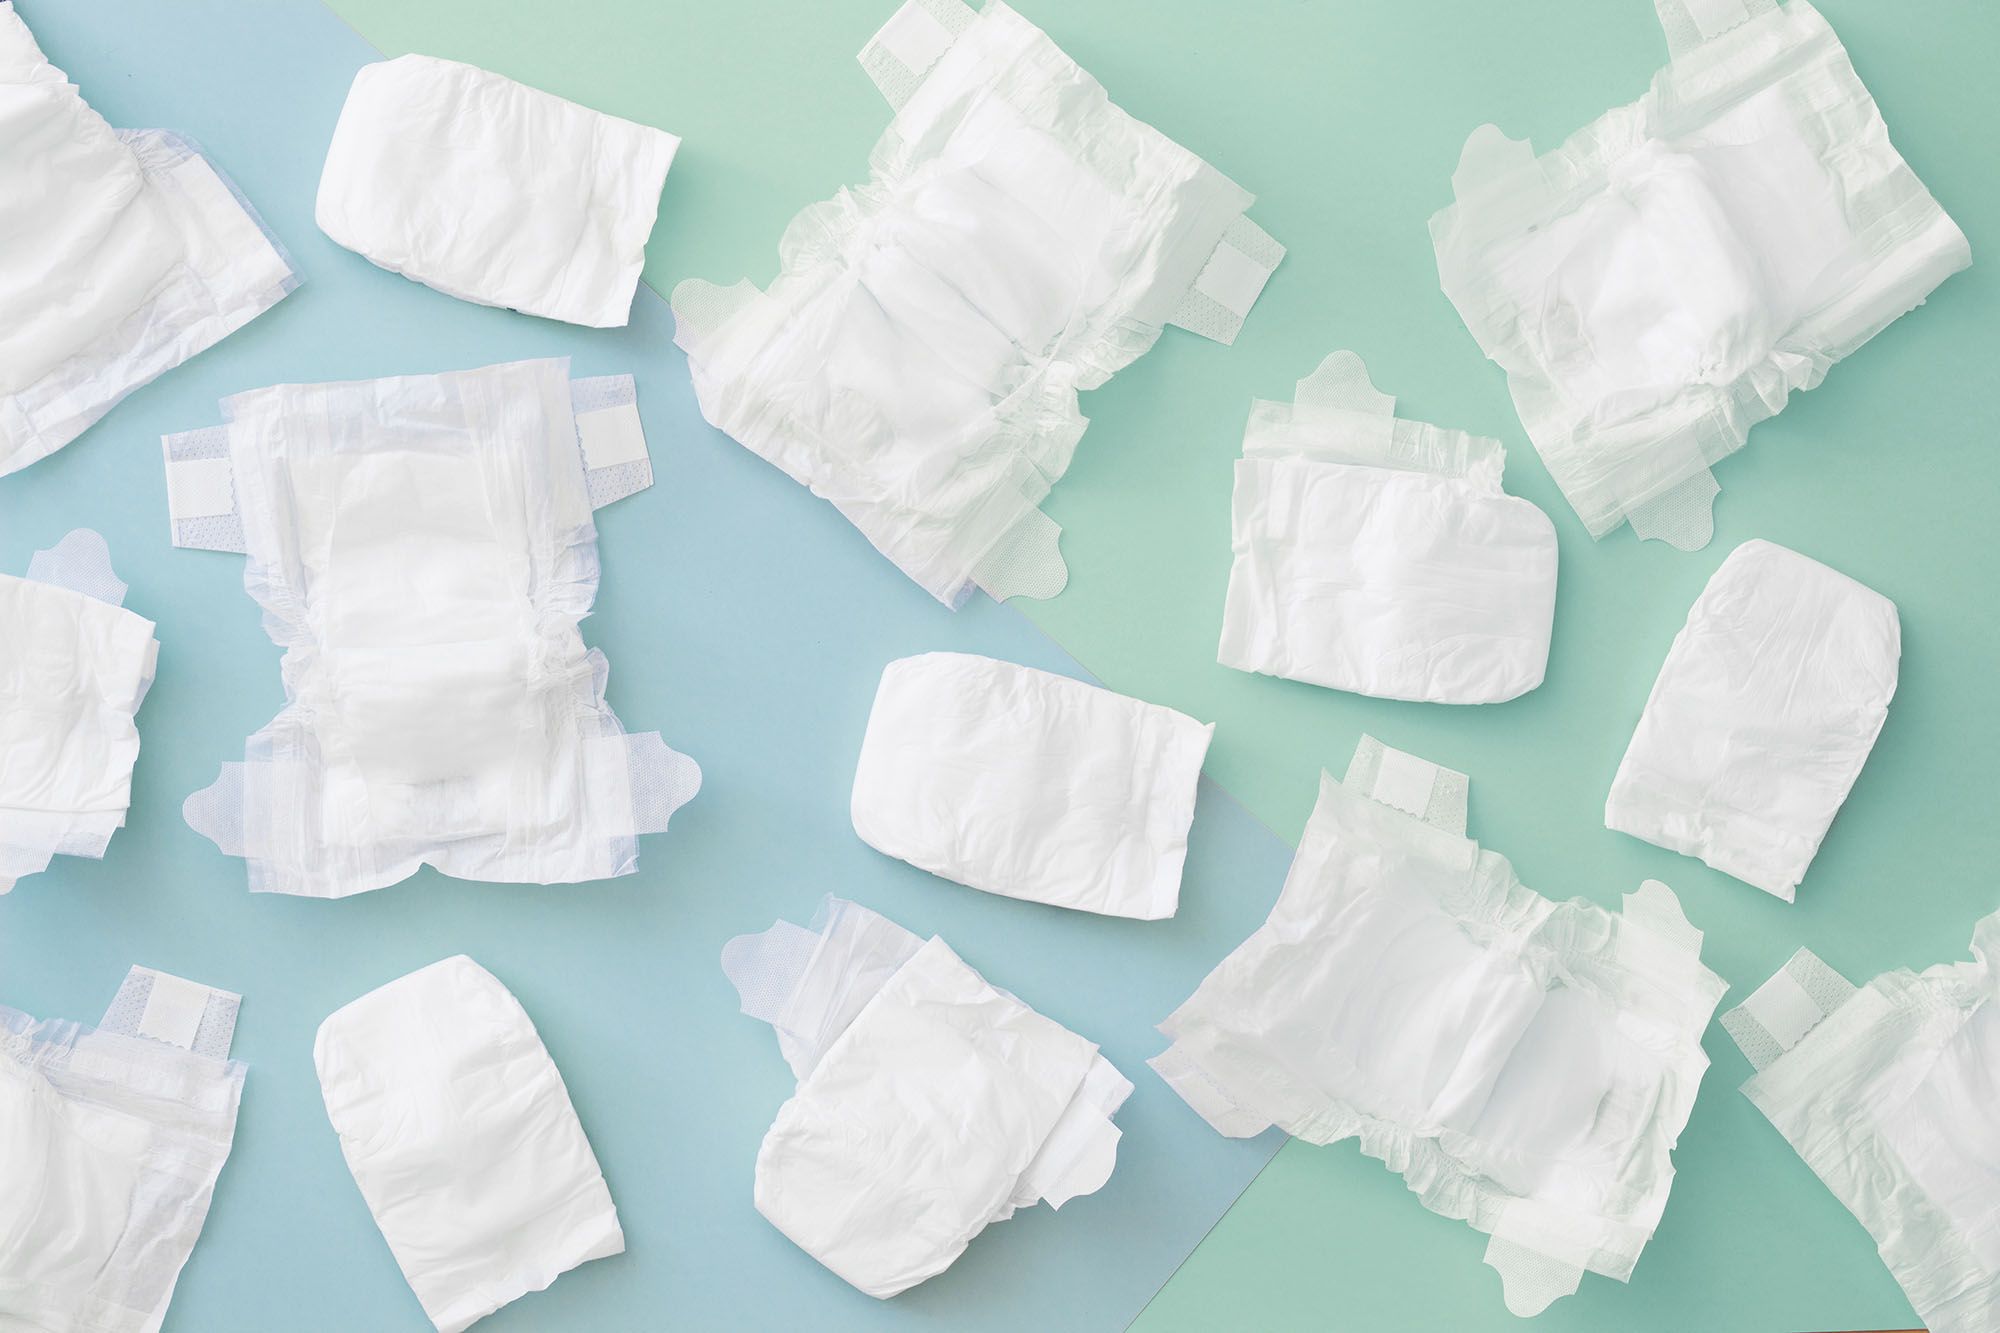 6 Best Overnight Diapers for Every Stage